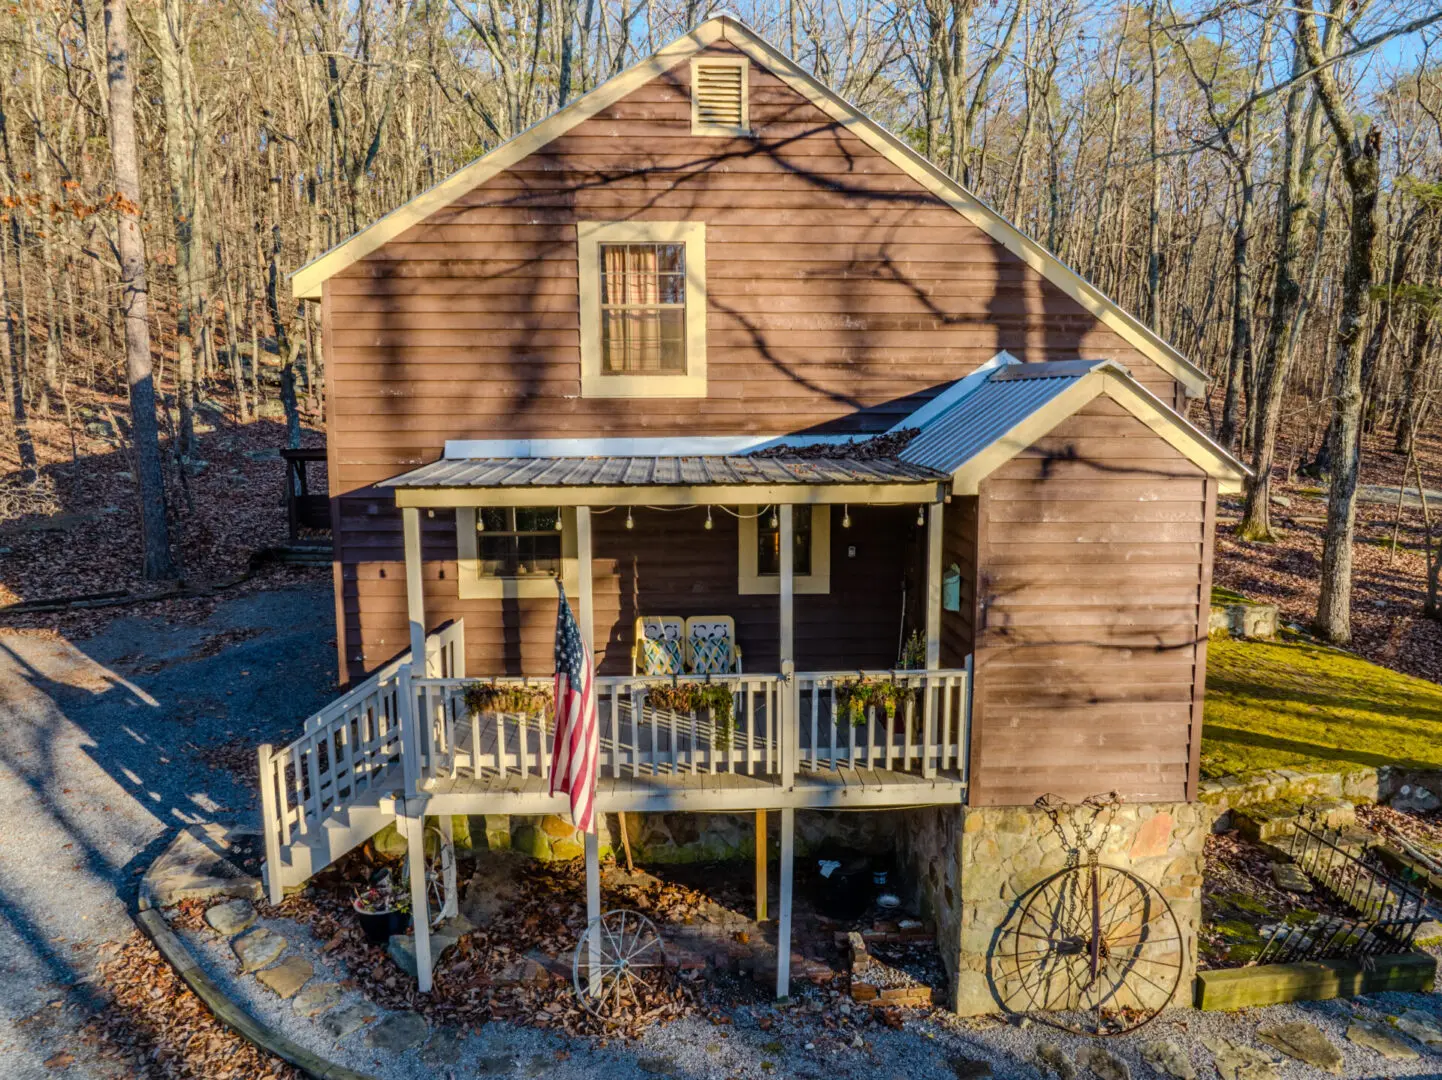 A vacation house with a porch and a wheel on the side.